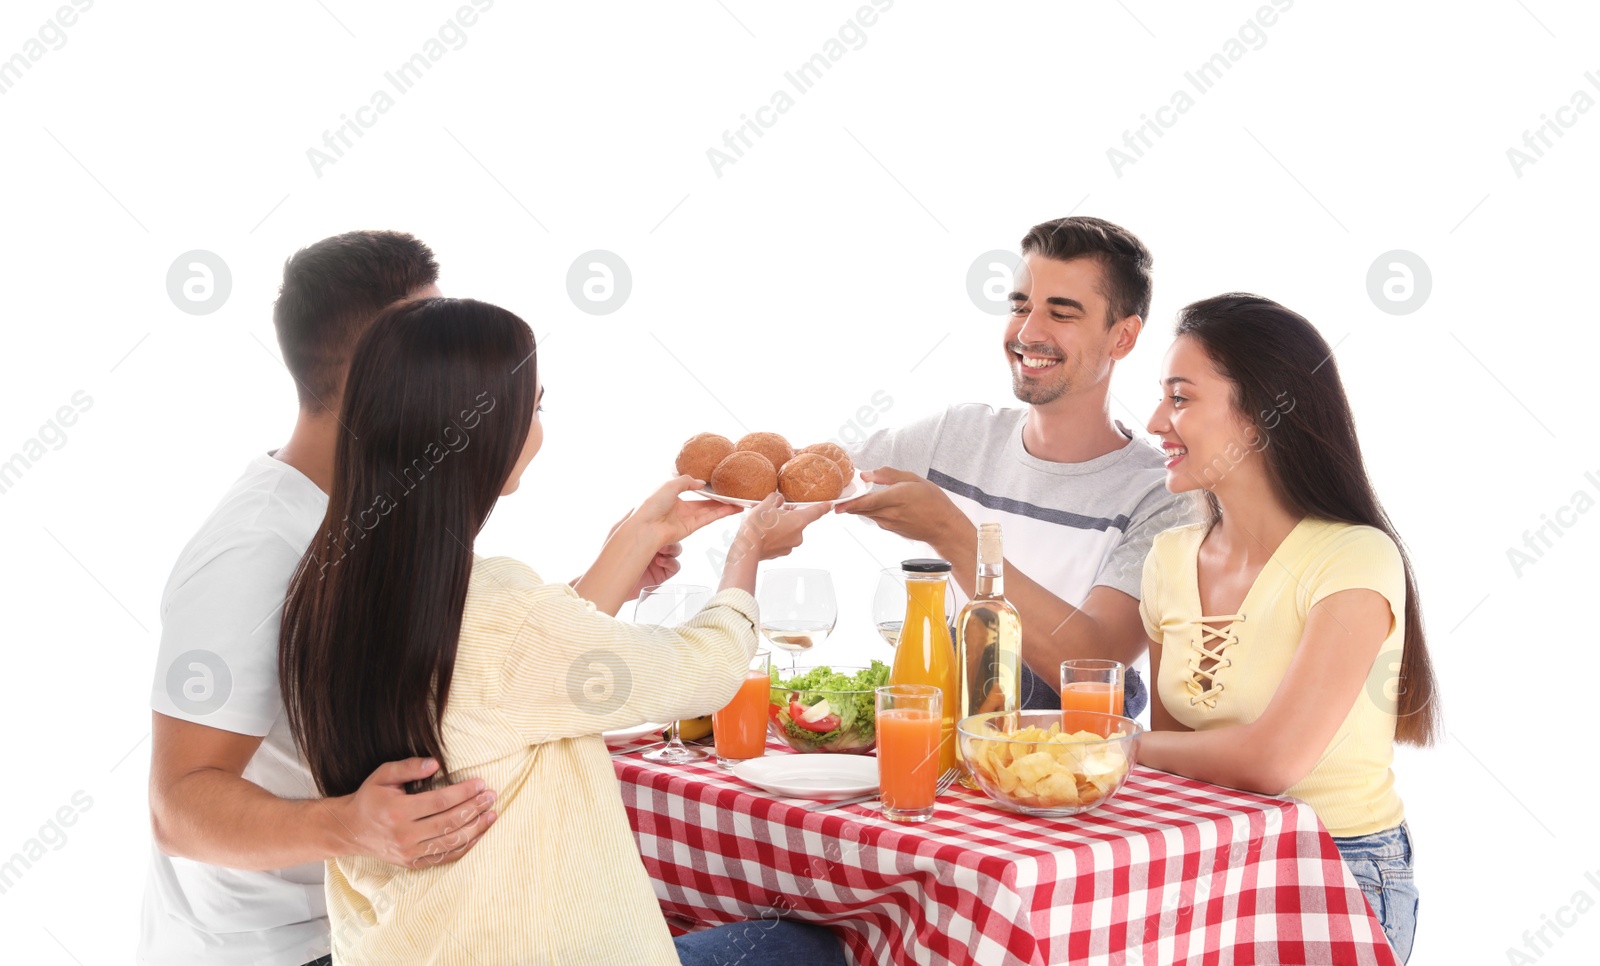 Photo of Group of friends at picnic table against white background